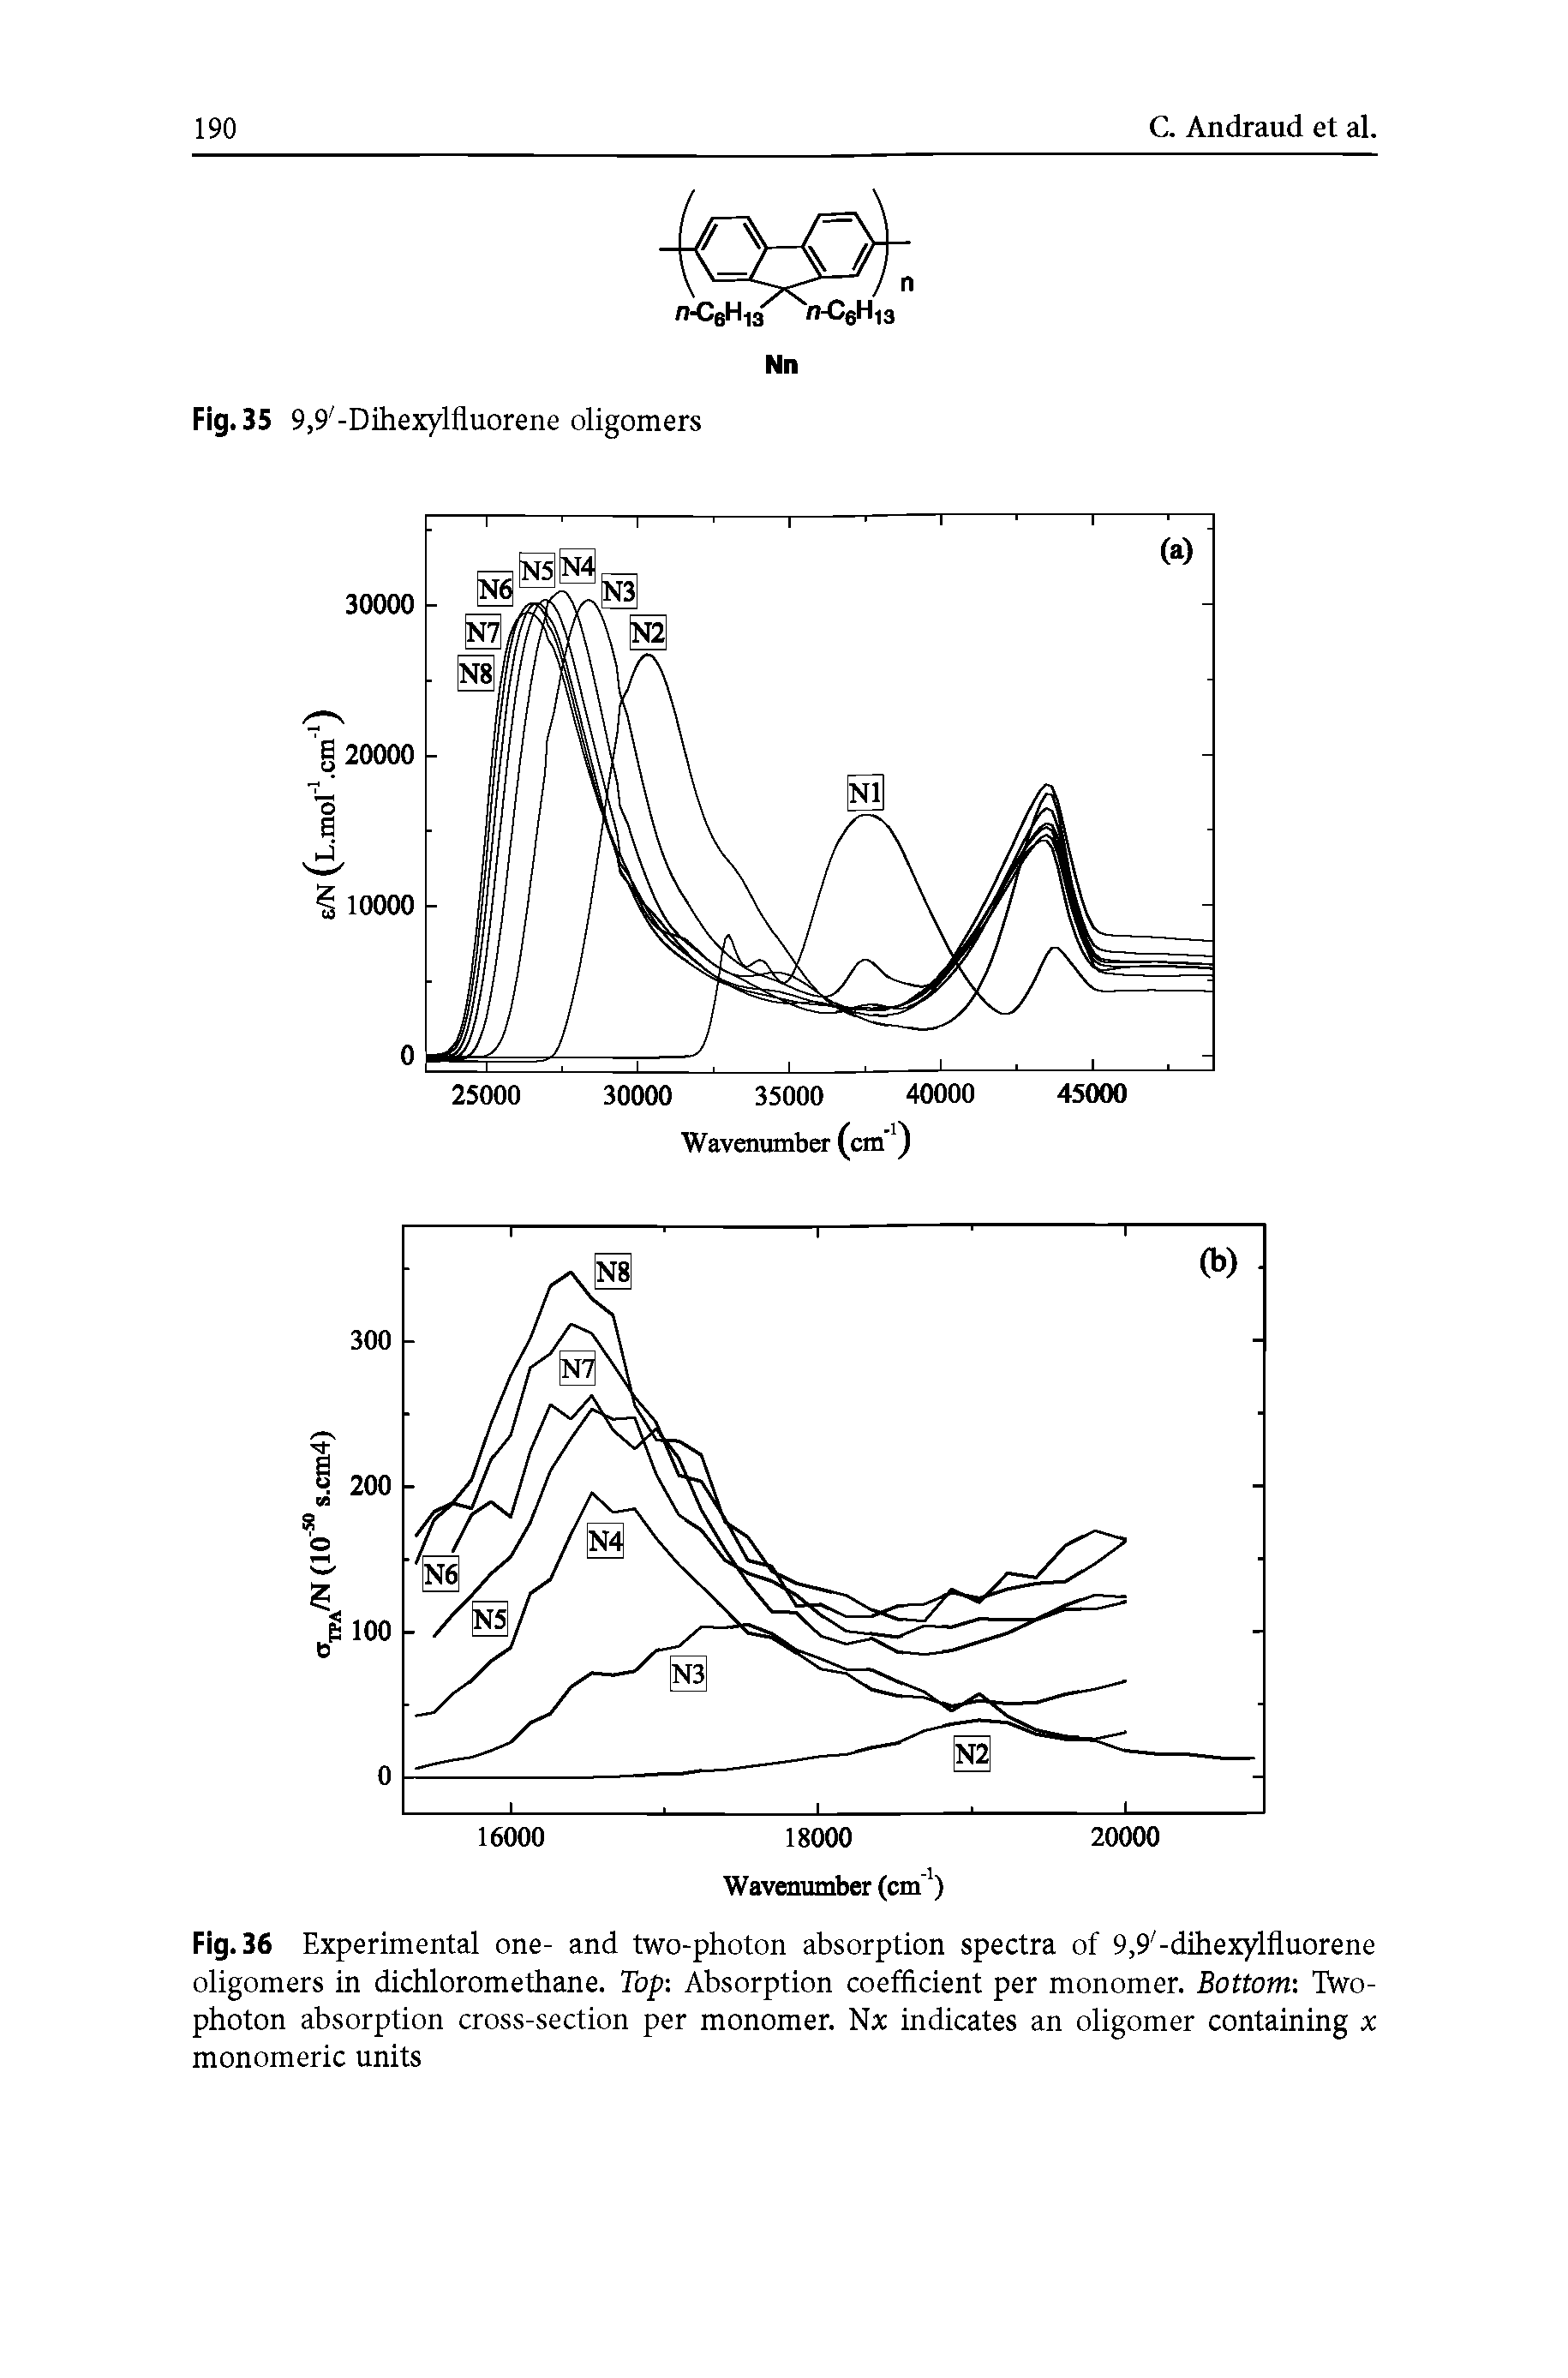 Fig. 36 Experimental one- and two-photon absorption spectra of 9,9 -dihexylfluorene oligomers in dichloromethane. Top Absorption coefficient per monomer. Bottom Two-photon absorption cross-section per monomer. Nx indicates an oligomer containing x monomeric units...